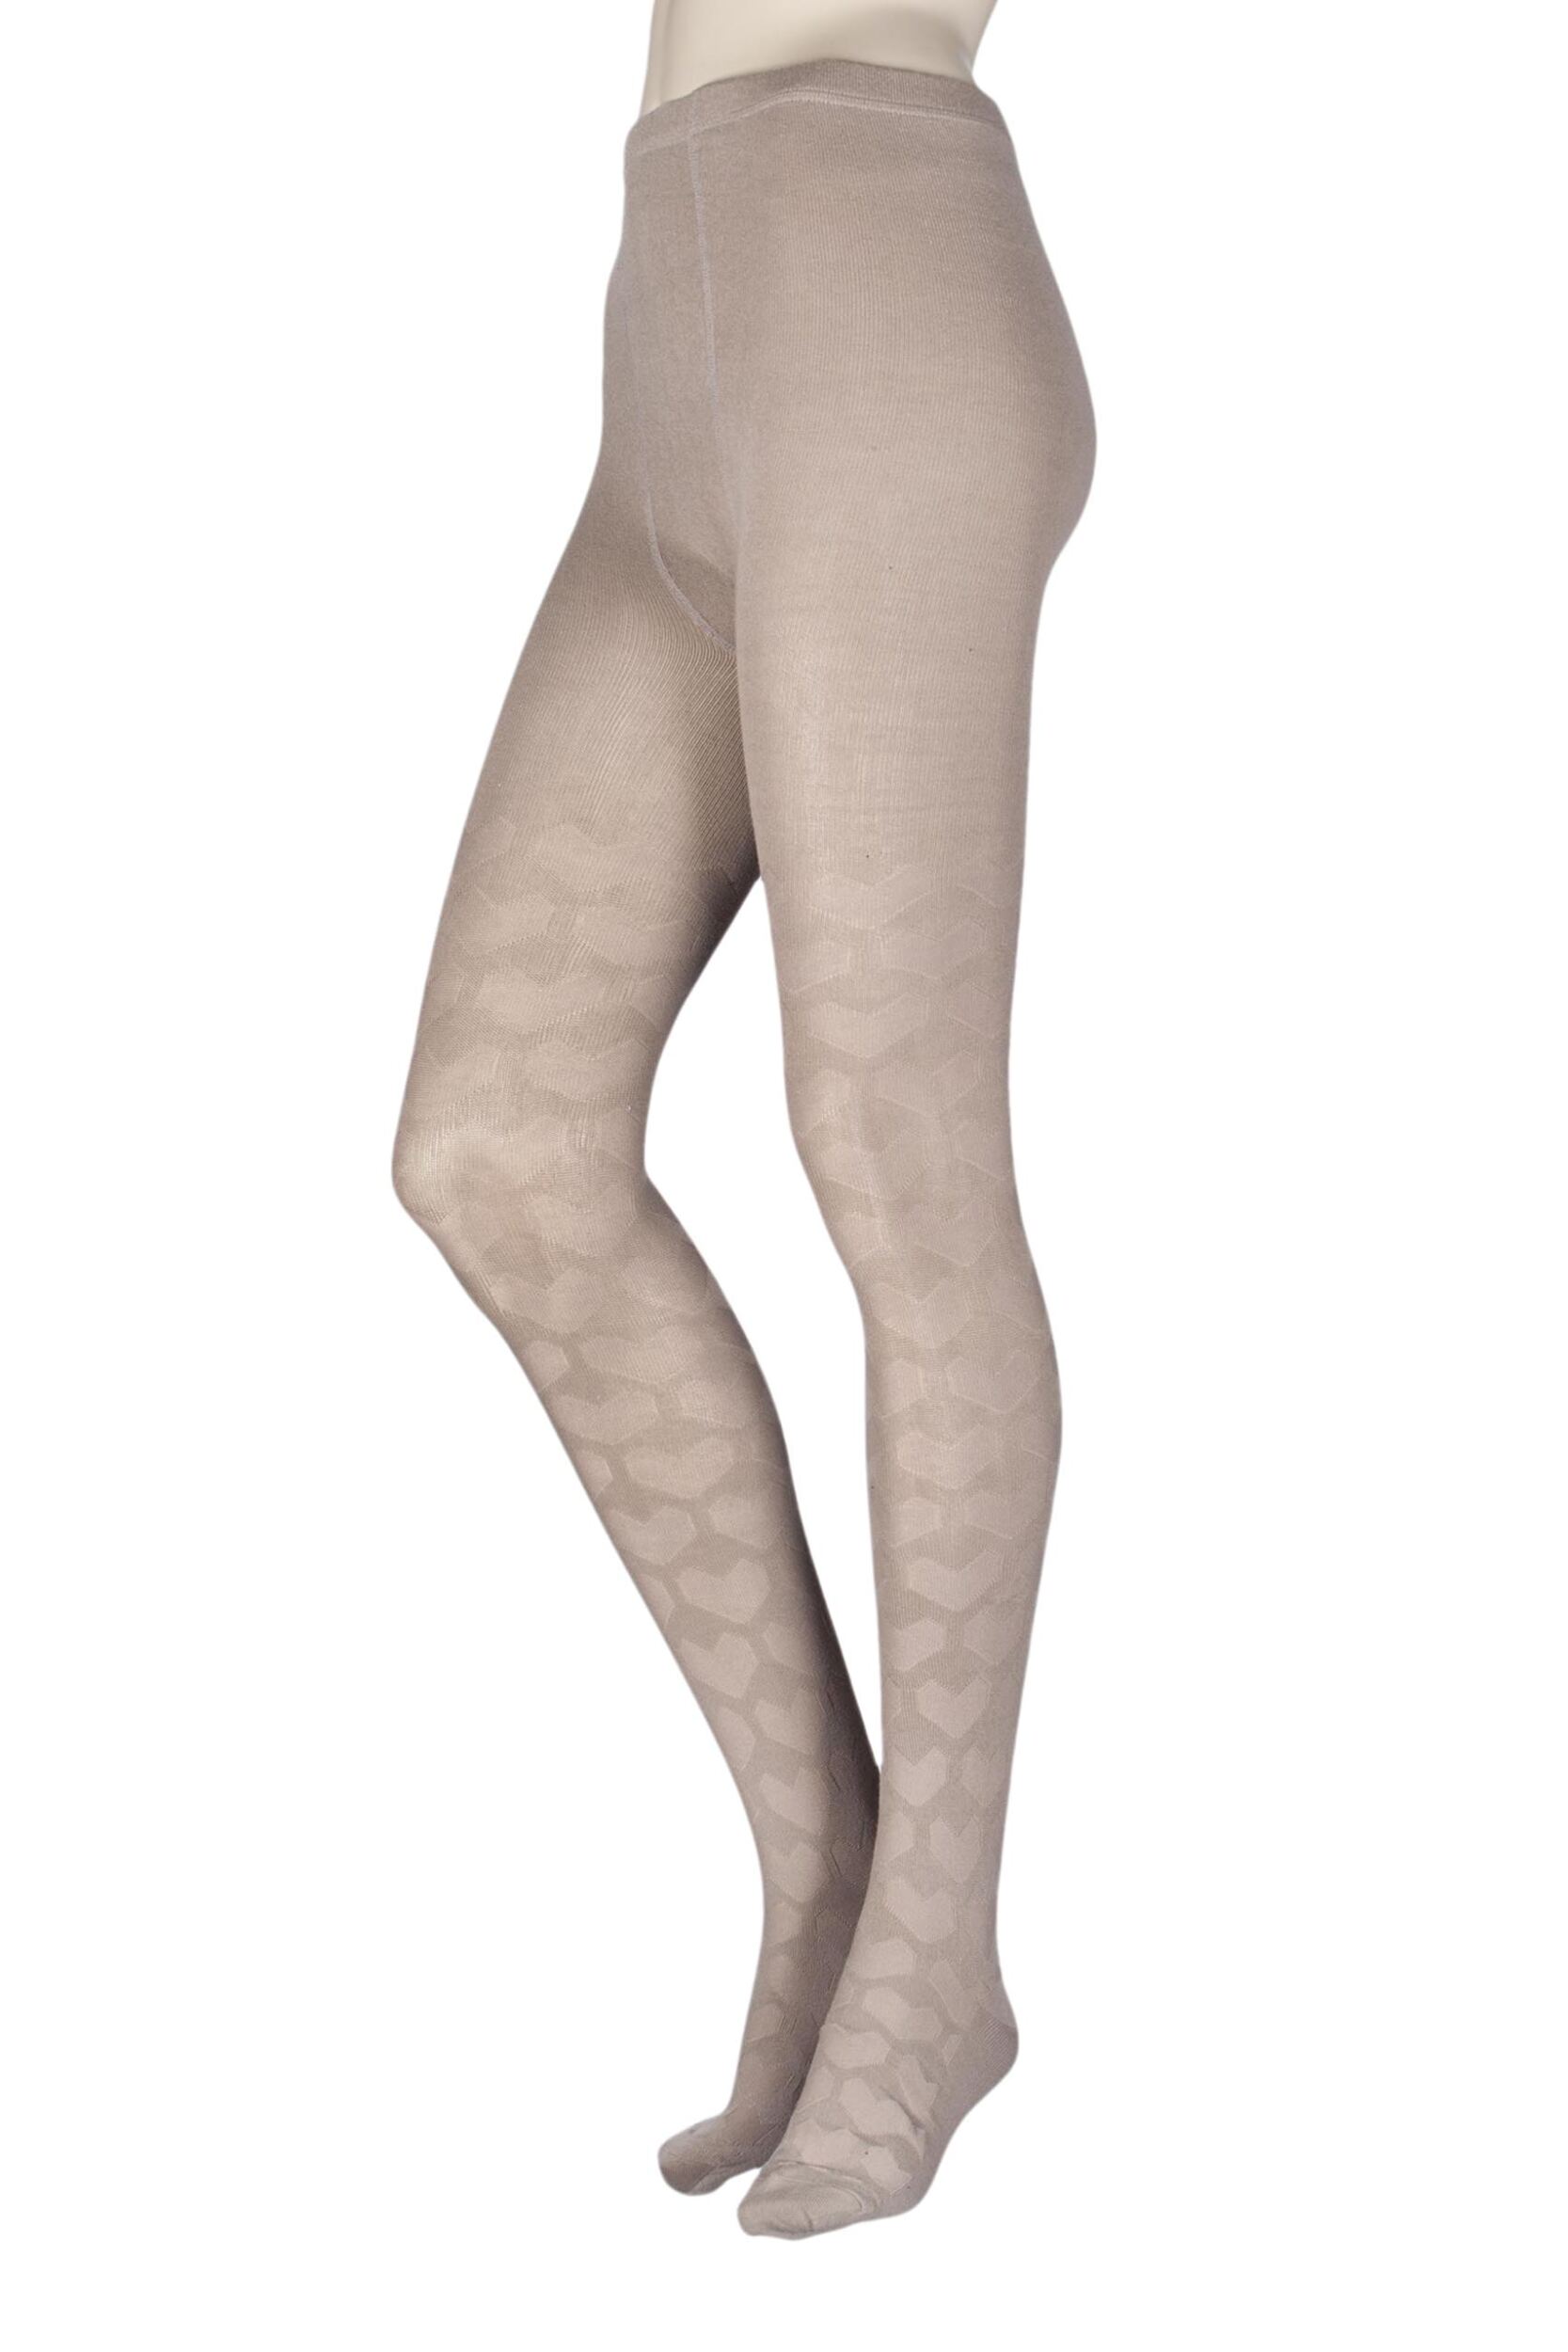 Image of Ladies 1 Pair Elle Winter Soft Heart Patterned Tights